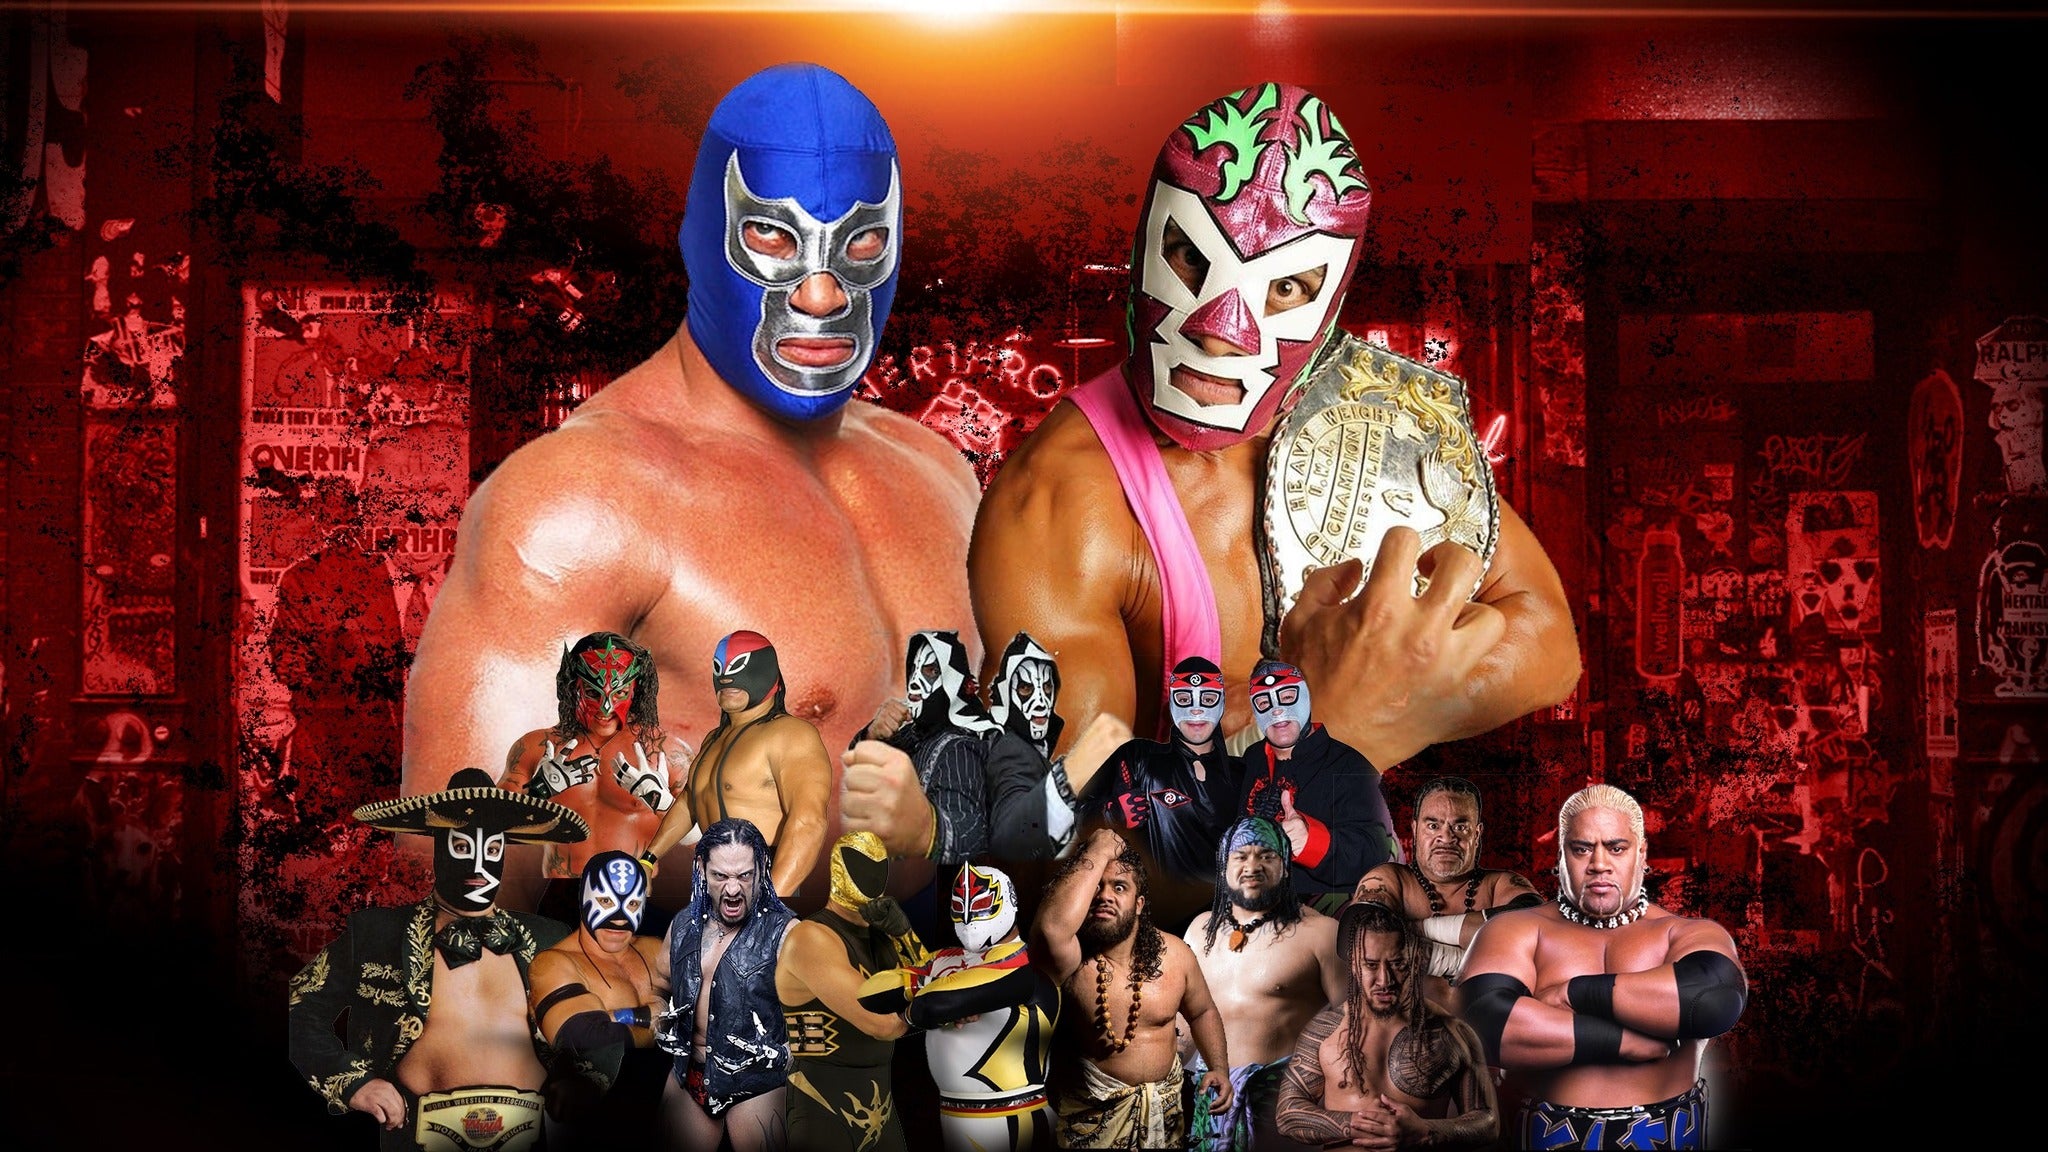 Buy Wrestling Lucha Libre Mexicana event tickets at Ticketmaster.com. 